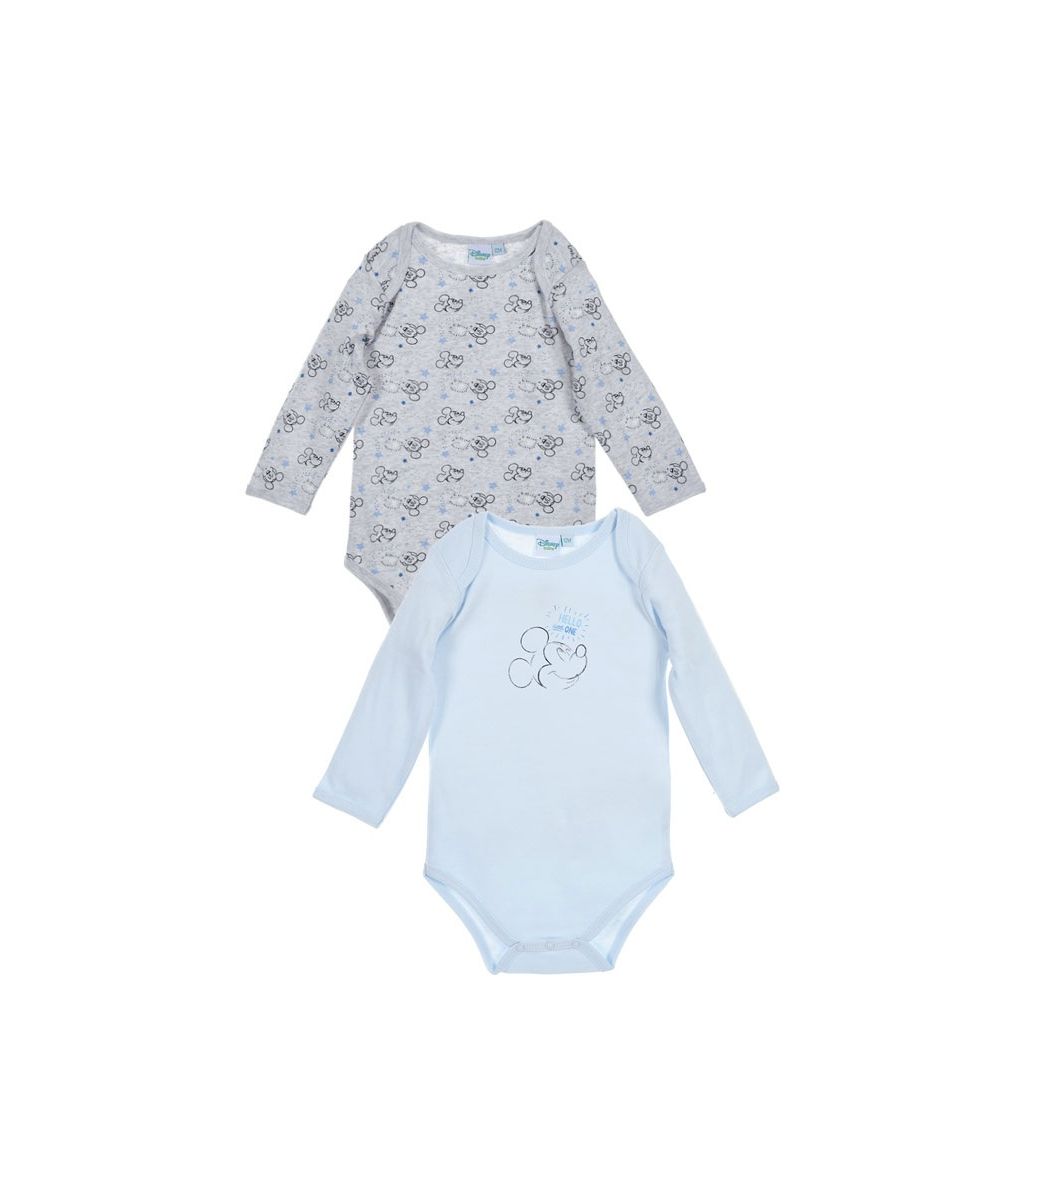 BABY SET 2 FULL BODY MICKEY MOUSE